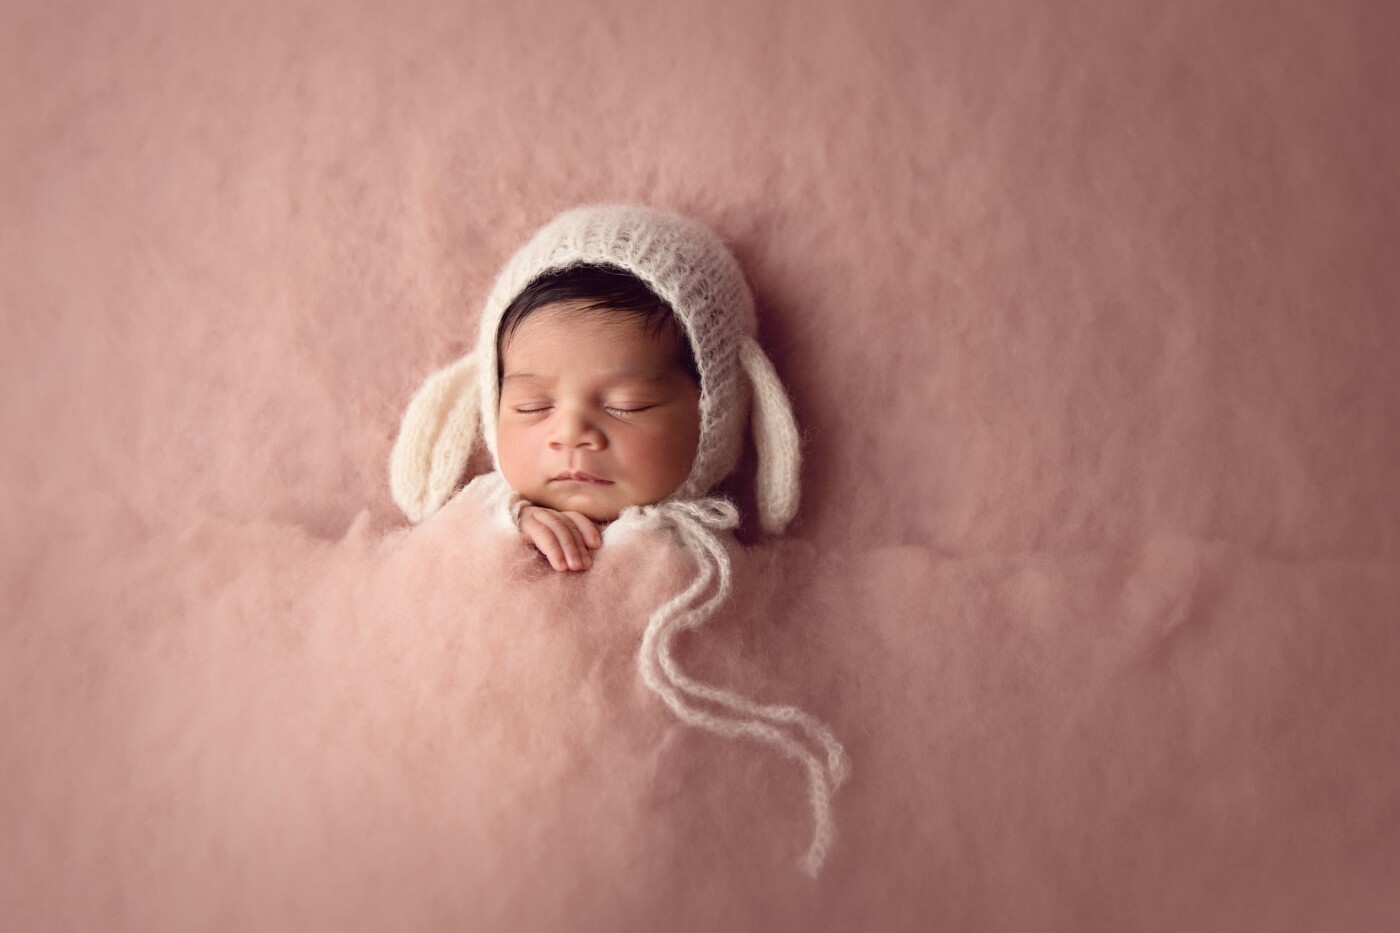 Meet 9 day old miss Emma. When Emma came for her newborn session, she wasn’t too keen on any of this posed naked baby business and much preferred to be wrapped up nice and snug. So wrap we did. She’s such a cute wittle lamb :)